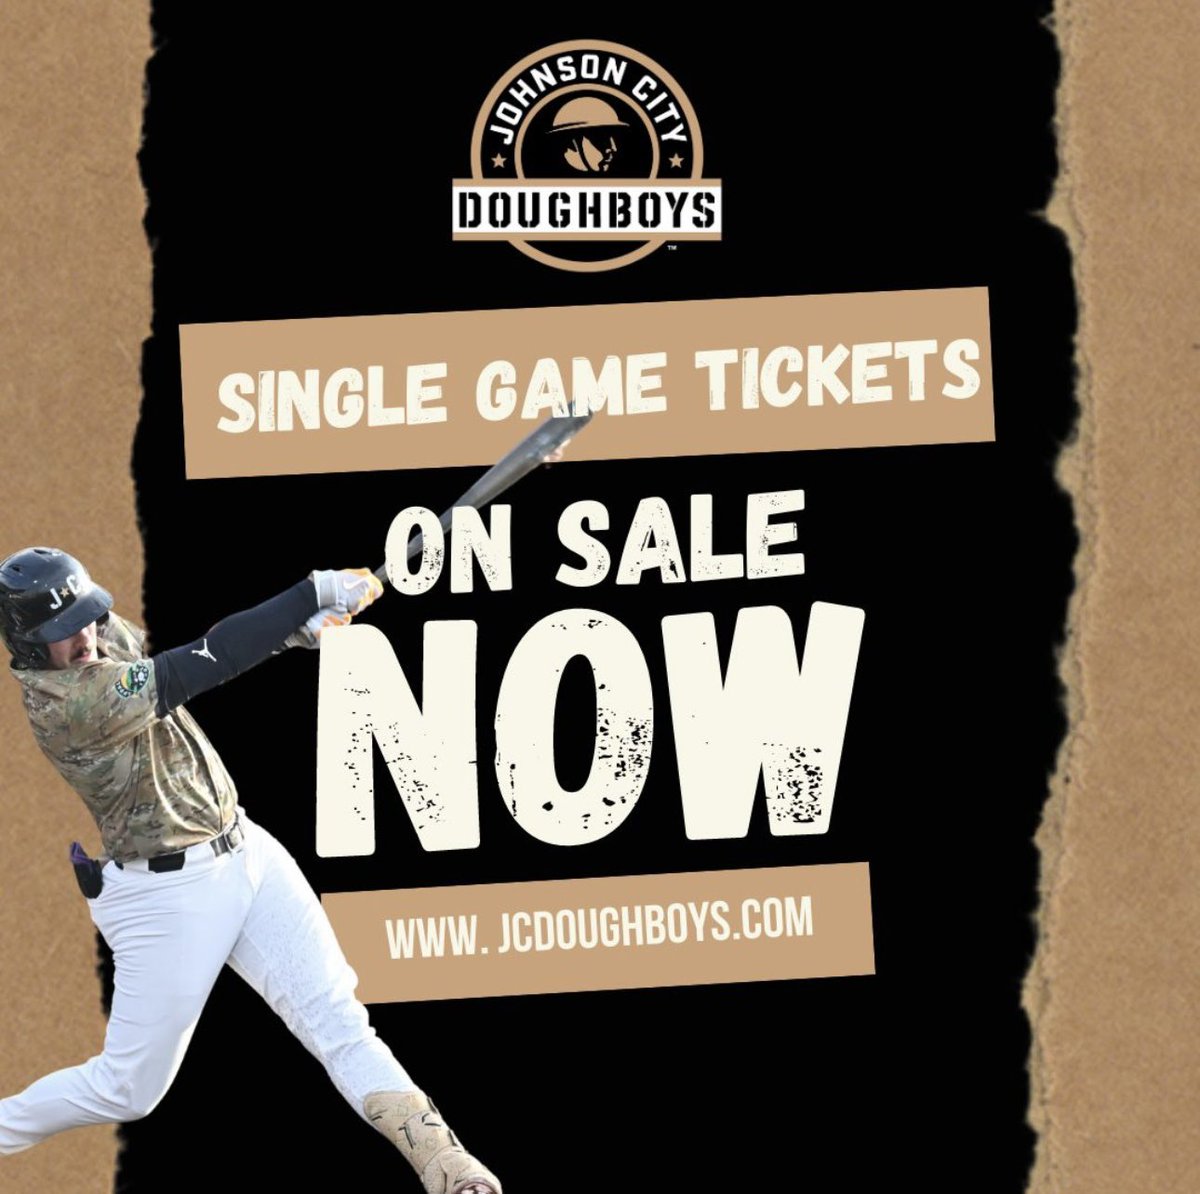 SINGLE GAME TICKETS ARE LIVE!!! appyleague.com/johnson-city/t…